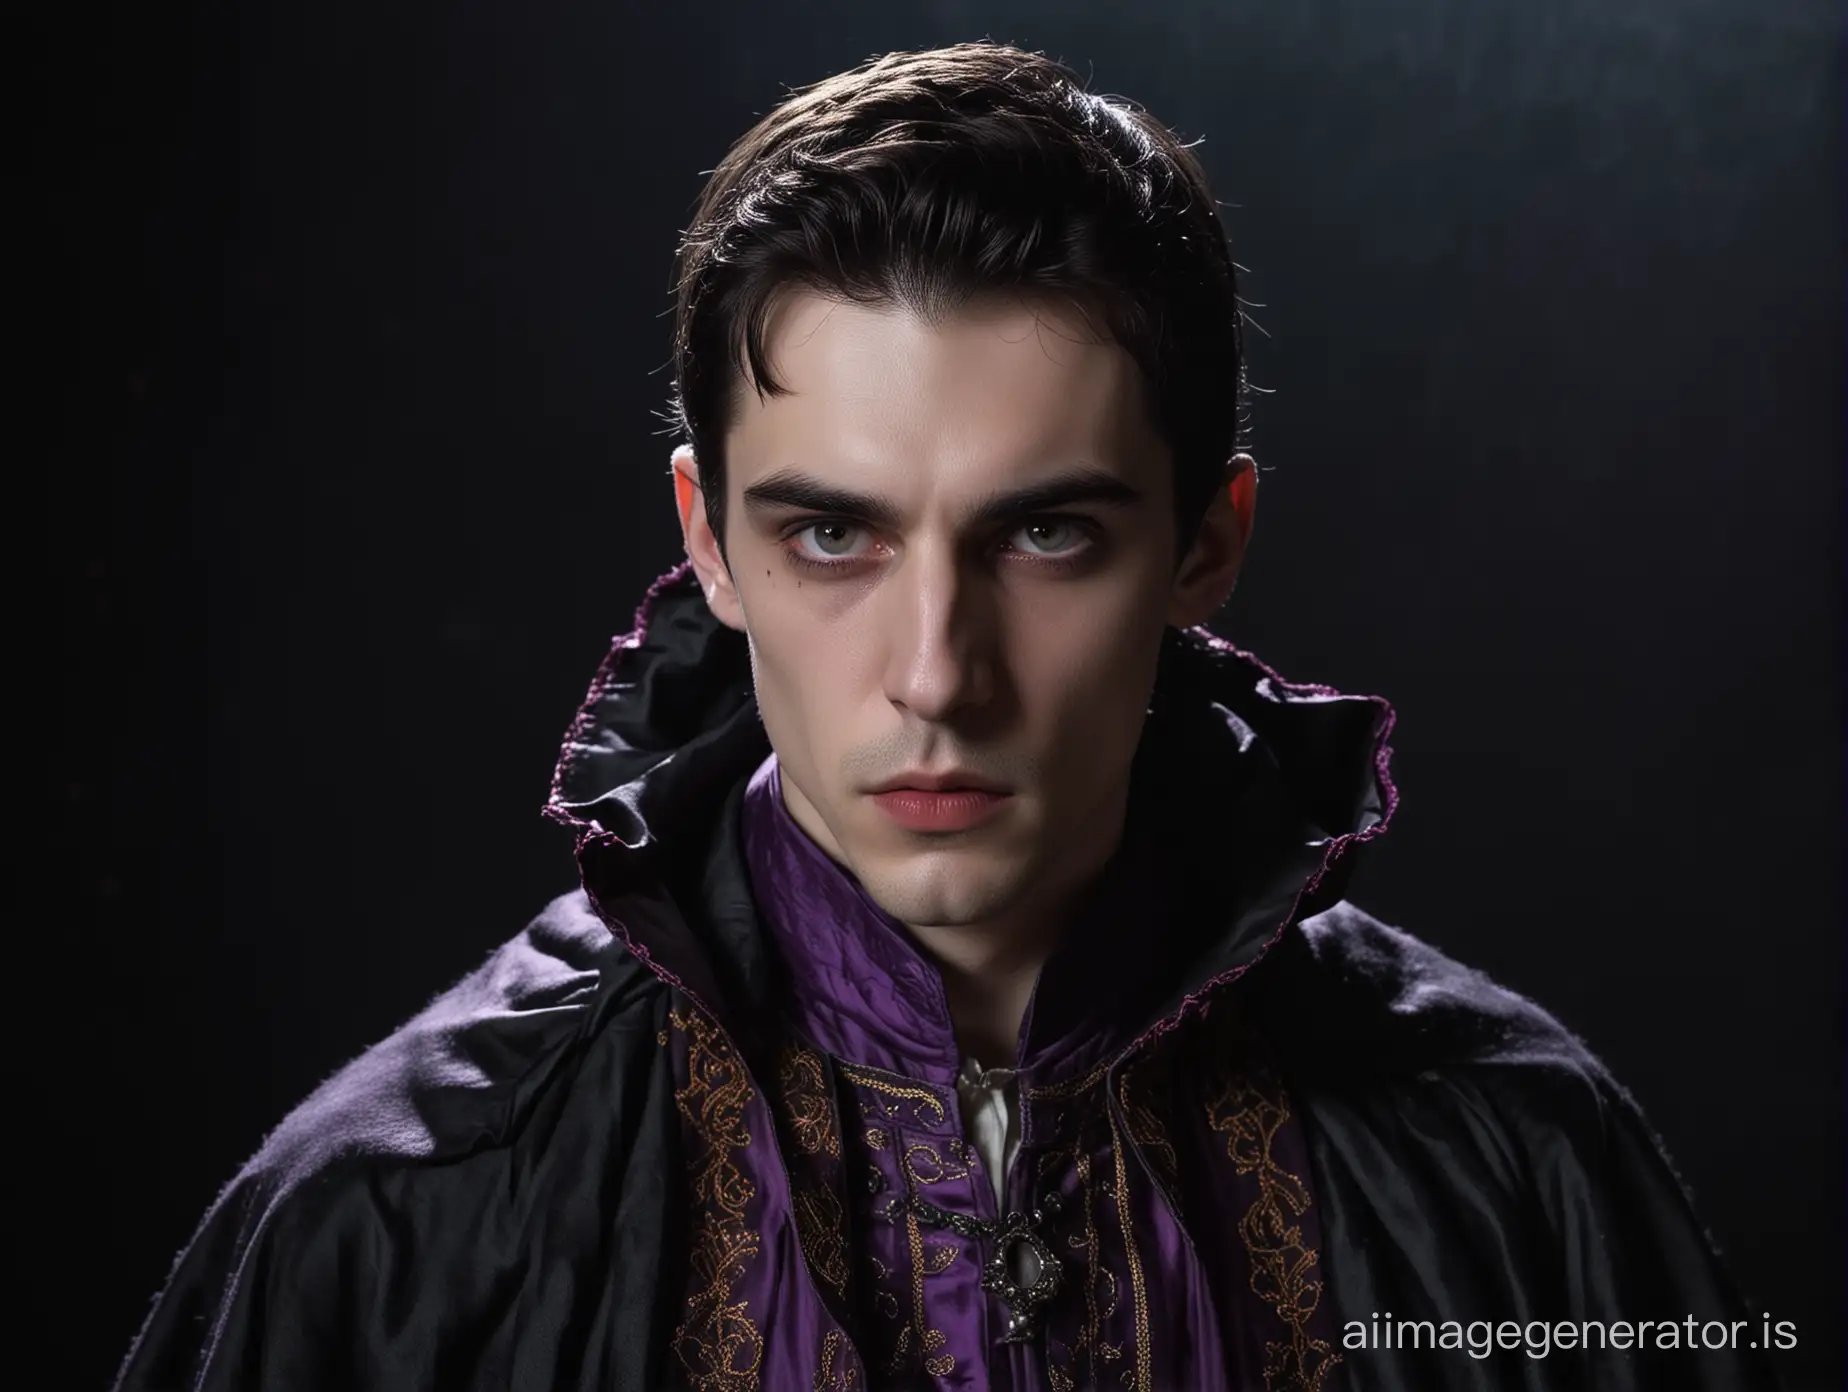 A young Dracula at eighteen. Facing forward, with a melancholic gaze. Blood stains his mouth. His eyes are also red. Wearing a large cloak-like attire with embroidery on the clothes. Under the cloak is a purple shirt. The background is pitch-black darkness. A bust shot.